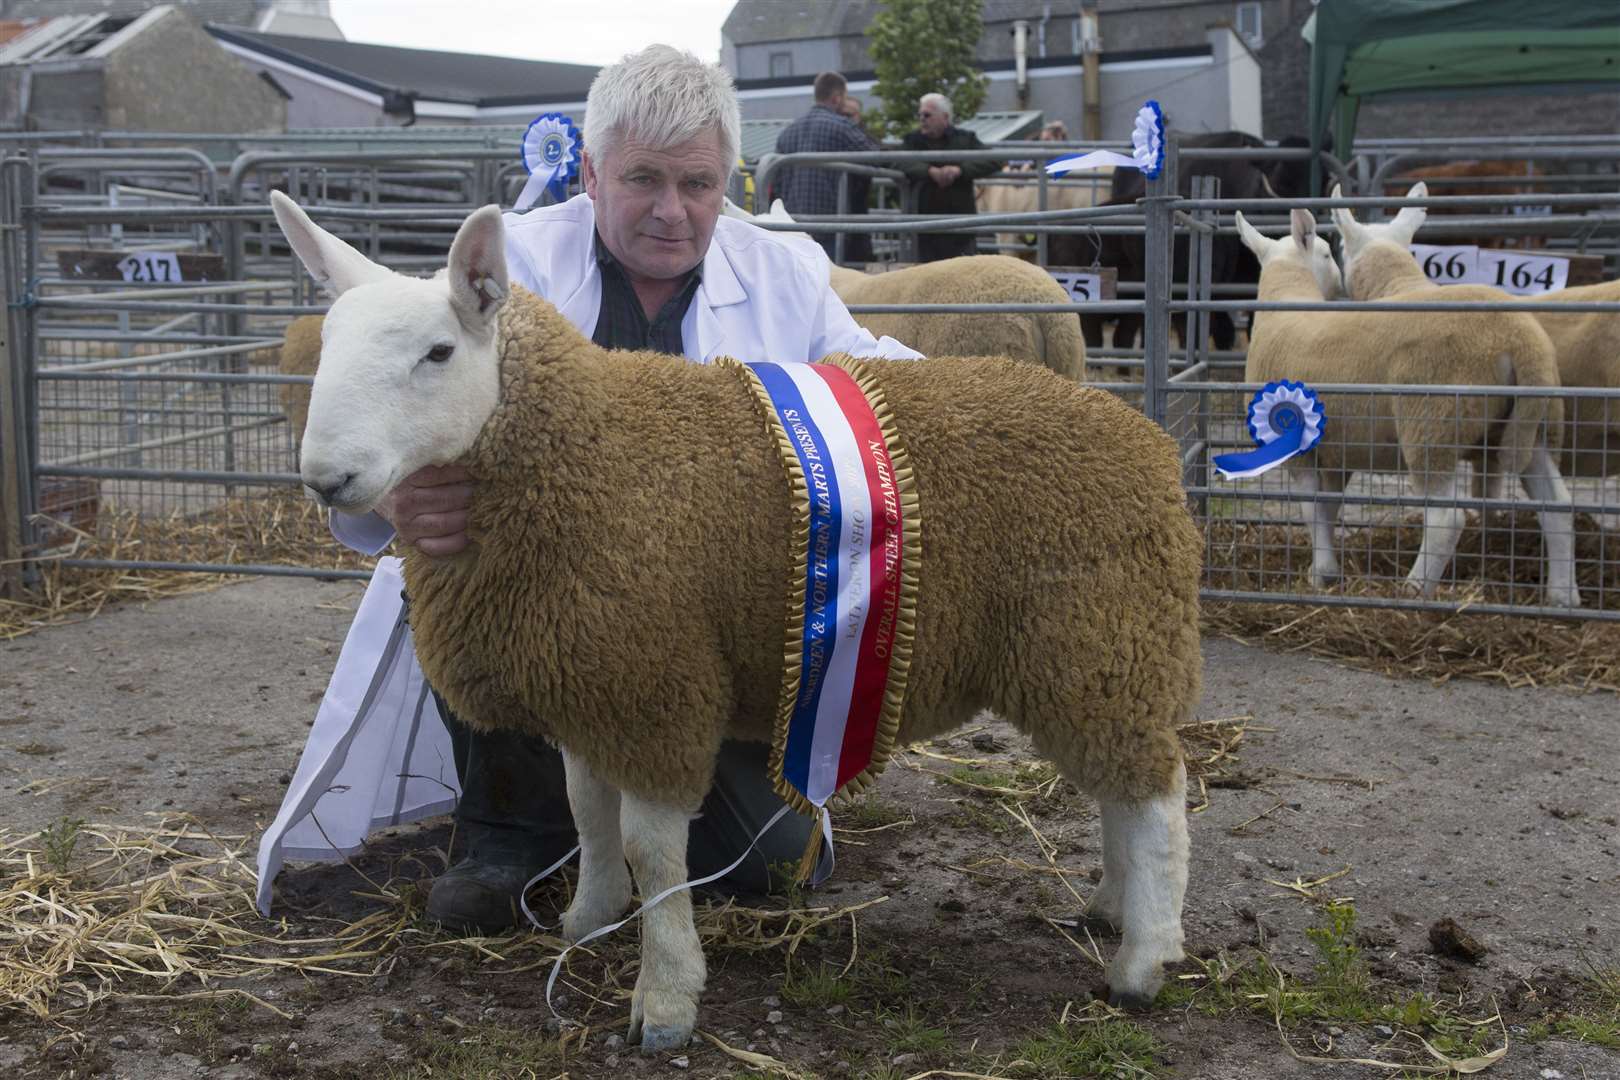 The supreme sheep championship and reserve champion of champions went to John Forbes, Boultach, Latheron, with his North Country Cheviot champion, a ewe lamb, born on the last day of February, and after the farm's new stock tup, Achscrabster Bonanza. John missed the show as he was attending a young farmers event in Yorkshire so it was left to his father, James, to exhibit the lamb. Picture: Robert MacDonald/Northern Studios